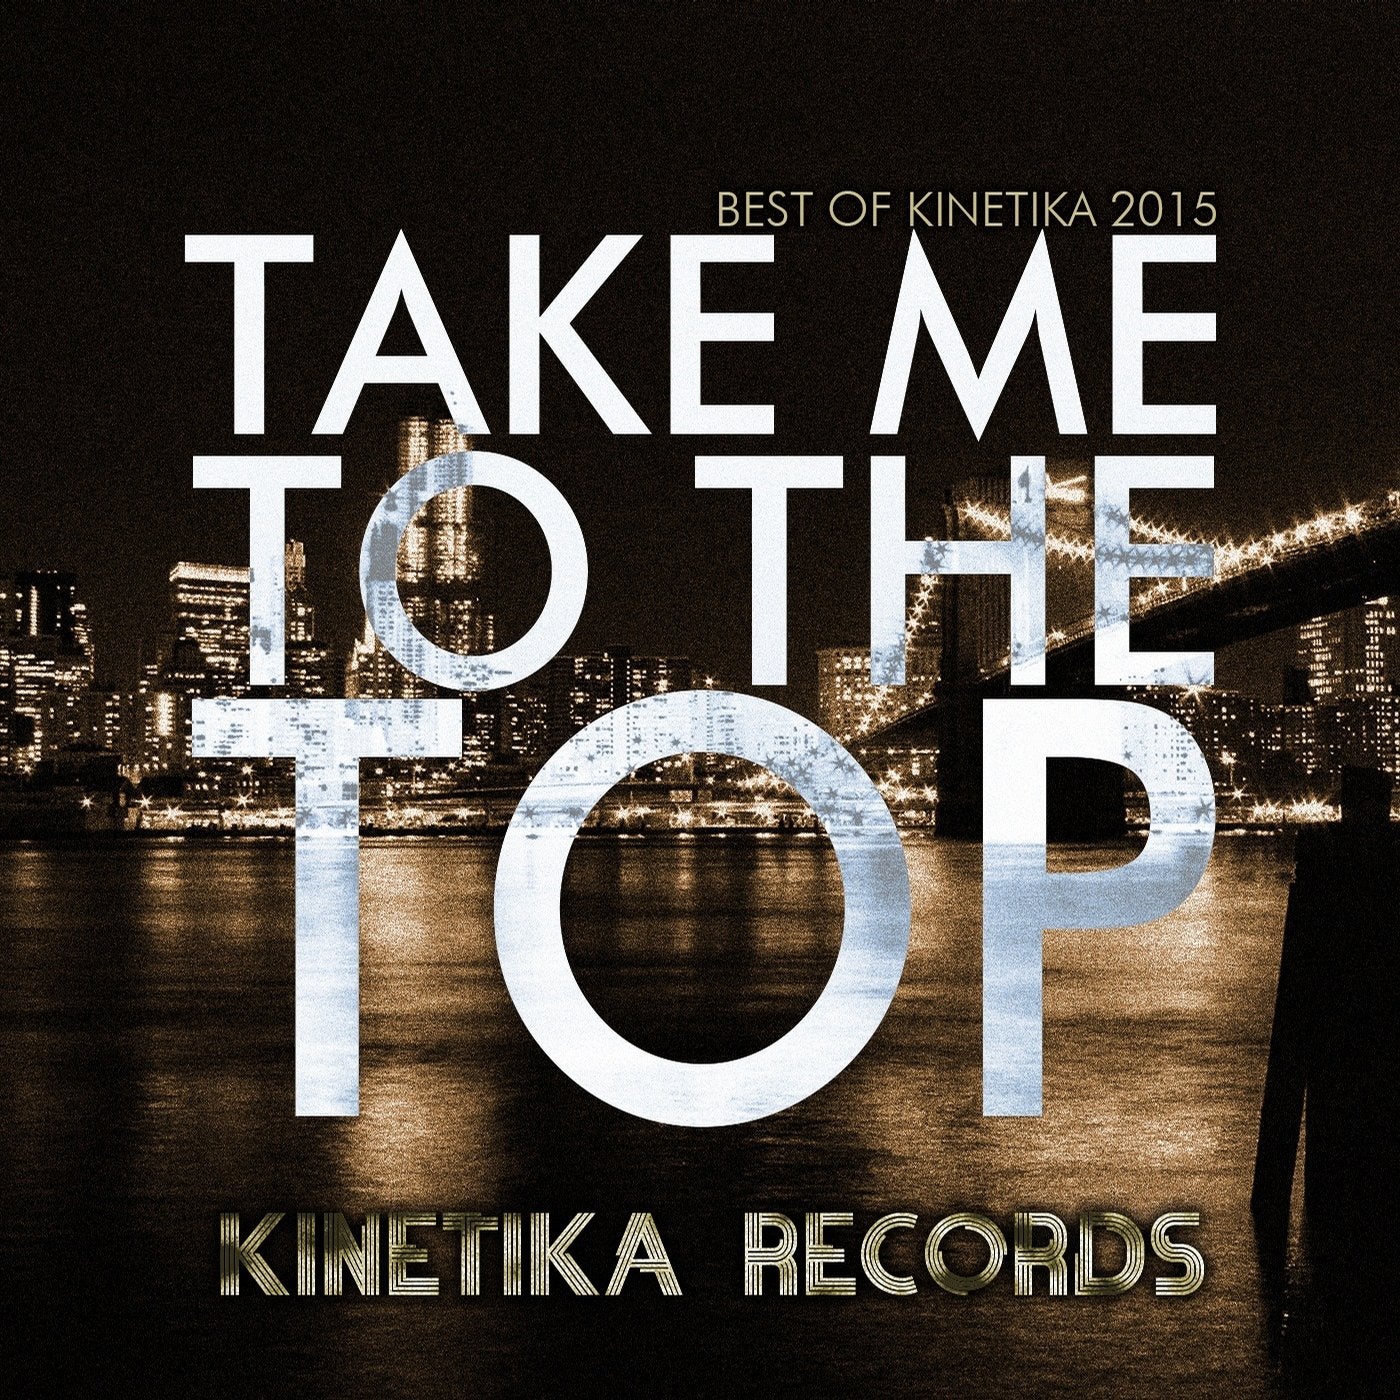 Take Me To The Top: Best Of Kinetika 2015